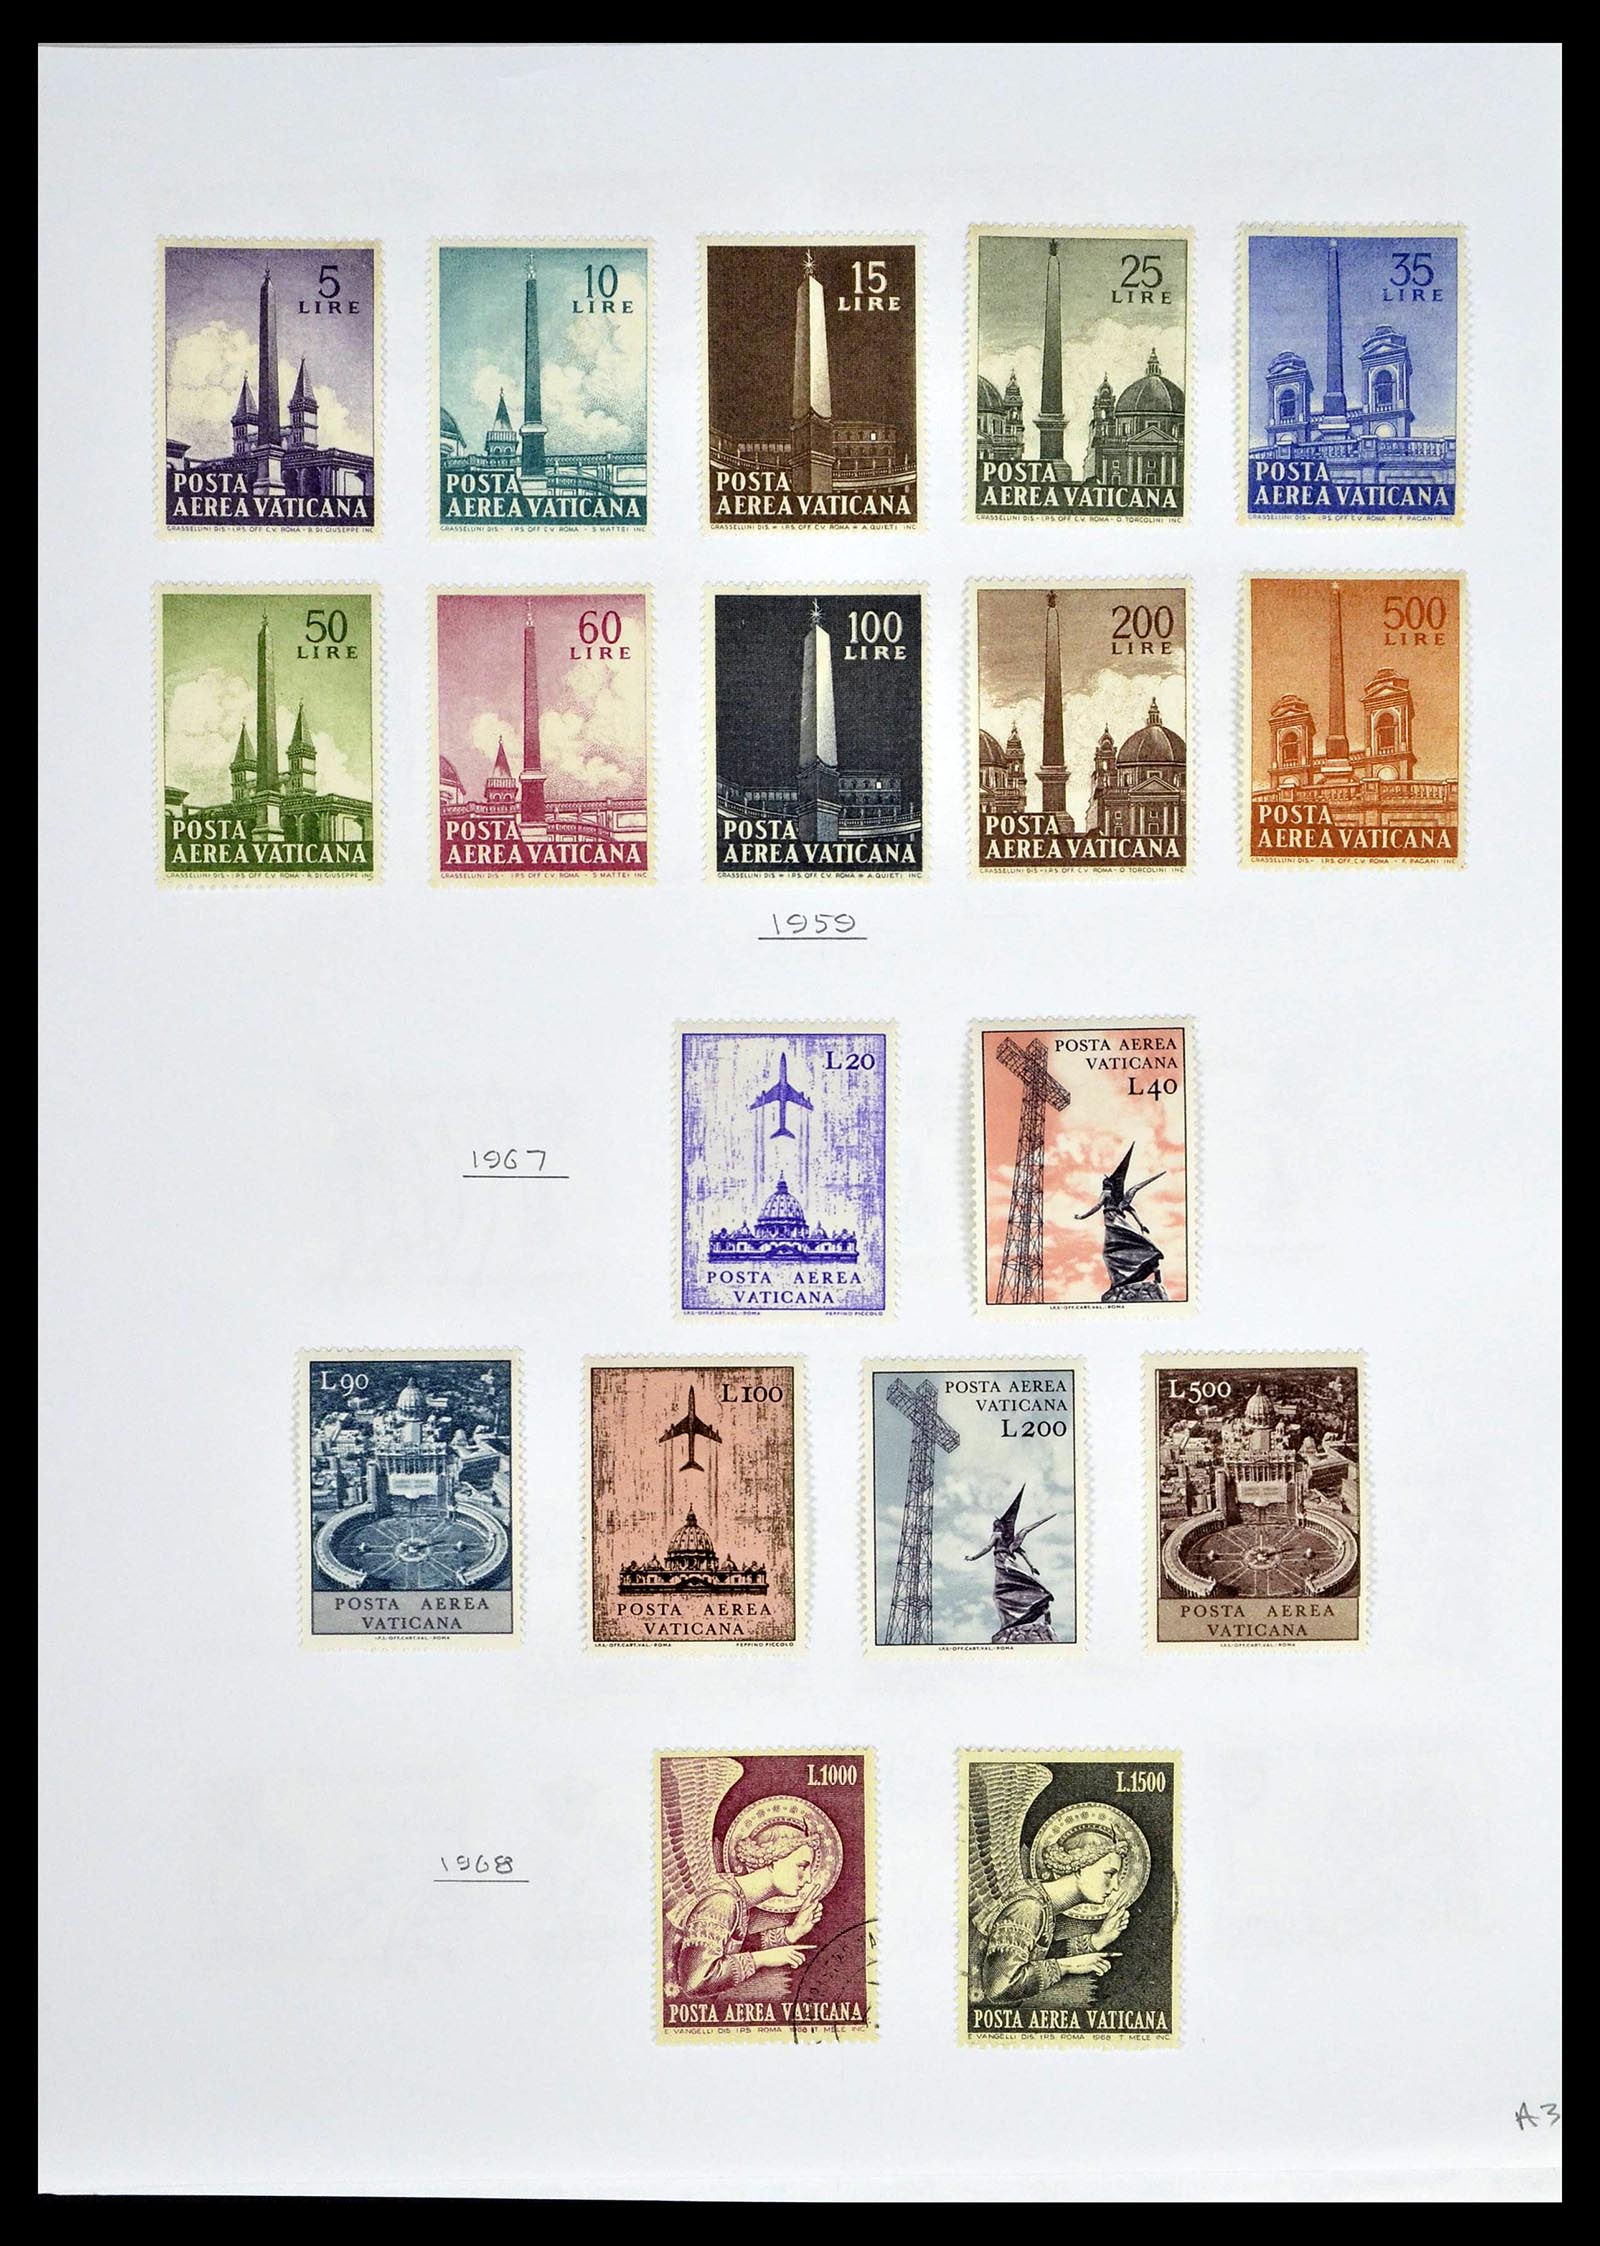 39099 0094 - Stamp collection 39099 Vatican 1852-2008.